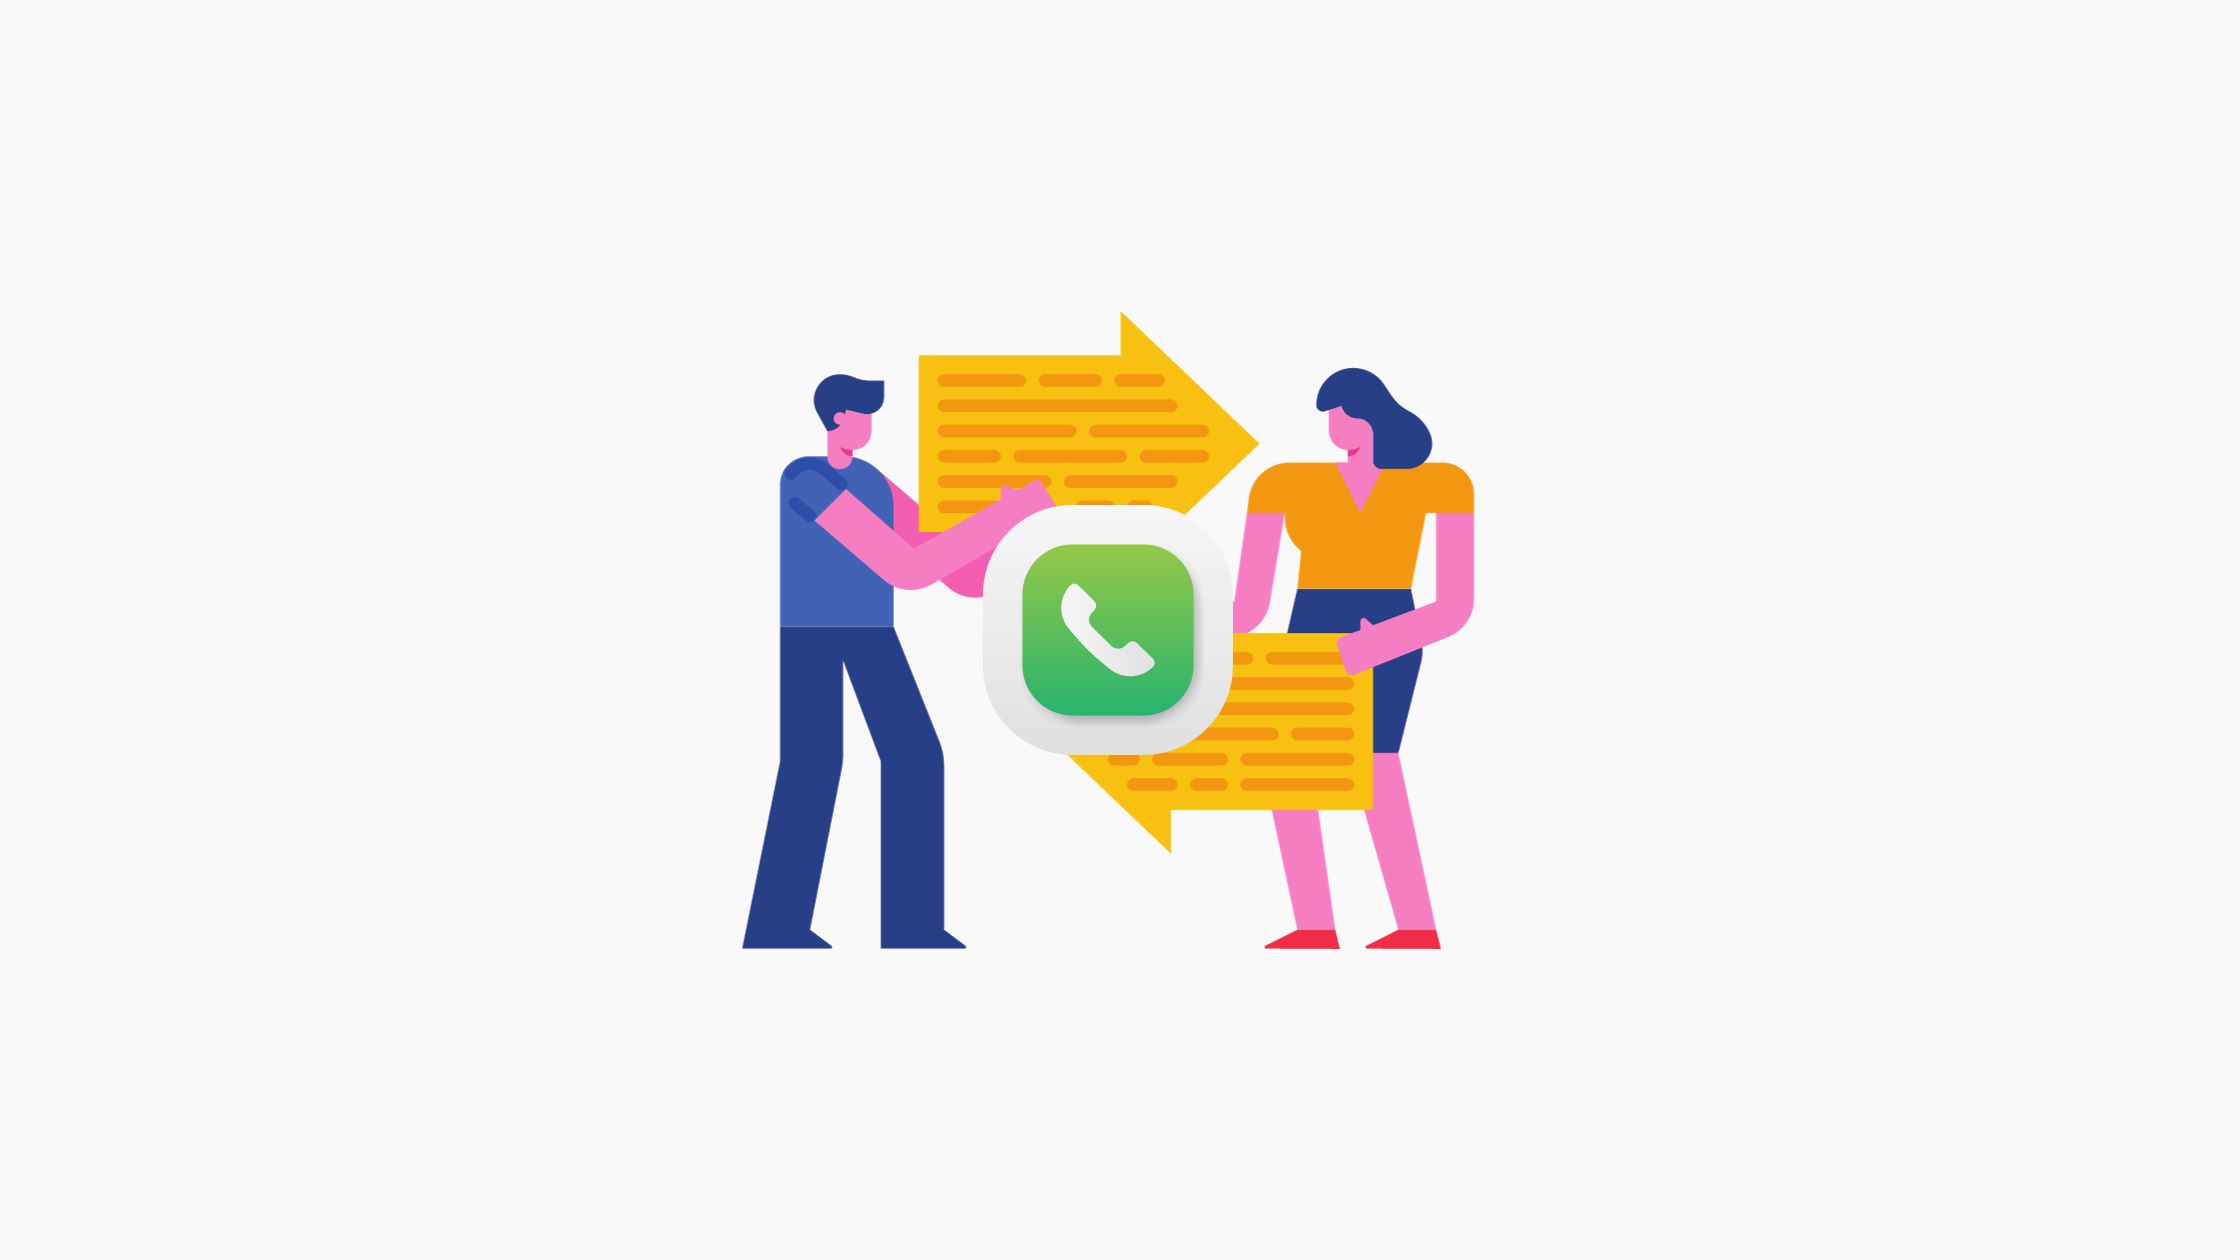 Why Should Schools Embrace WhatsApp Business as a Communication Tool?